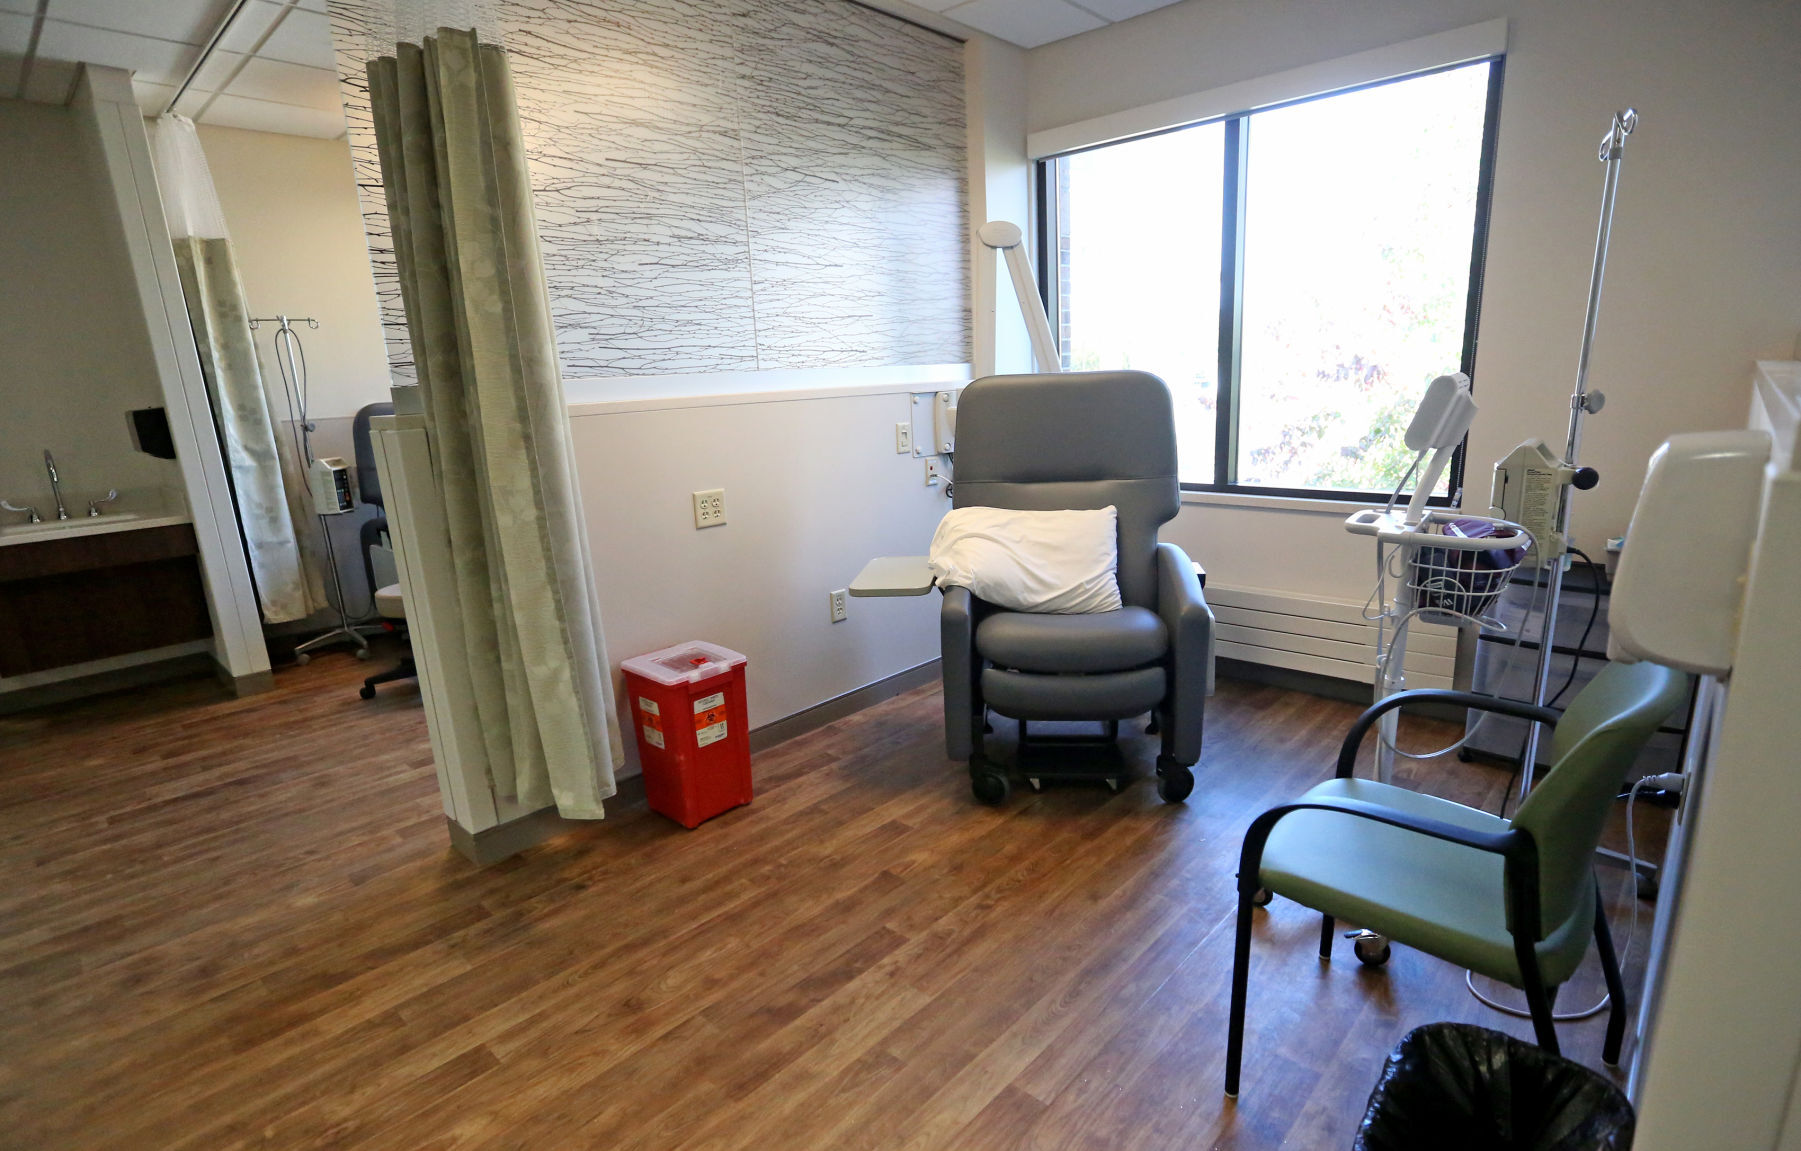 An infusion bay at the new Integrated Cancer Center in Dubuque on Friday, Sept. 25, 2020. The center is a collaboration between UnityPoint Health-Finley Hospital and Grand River Medical Group and will be located on Finley